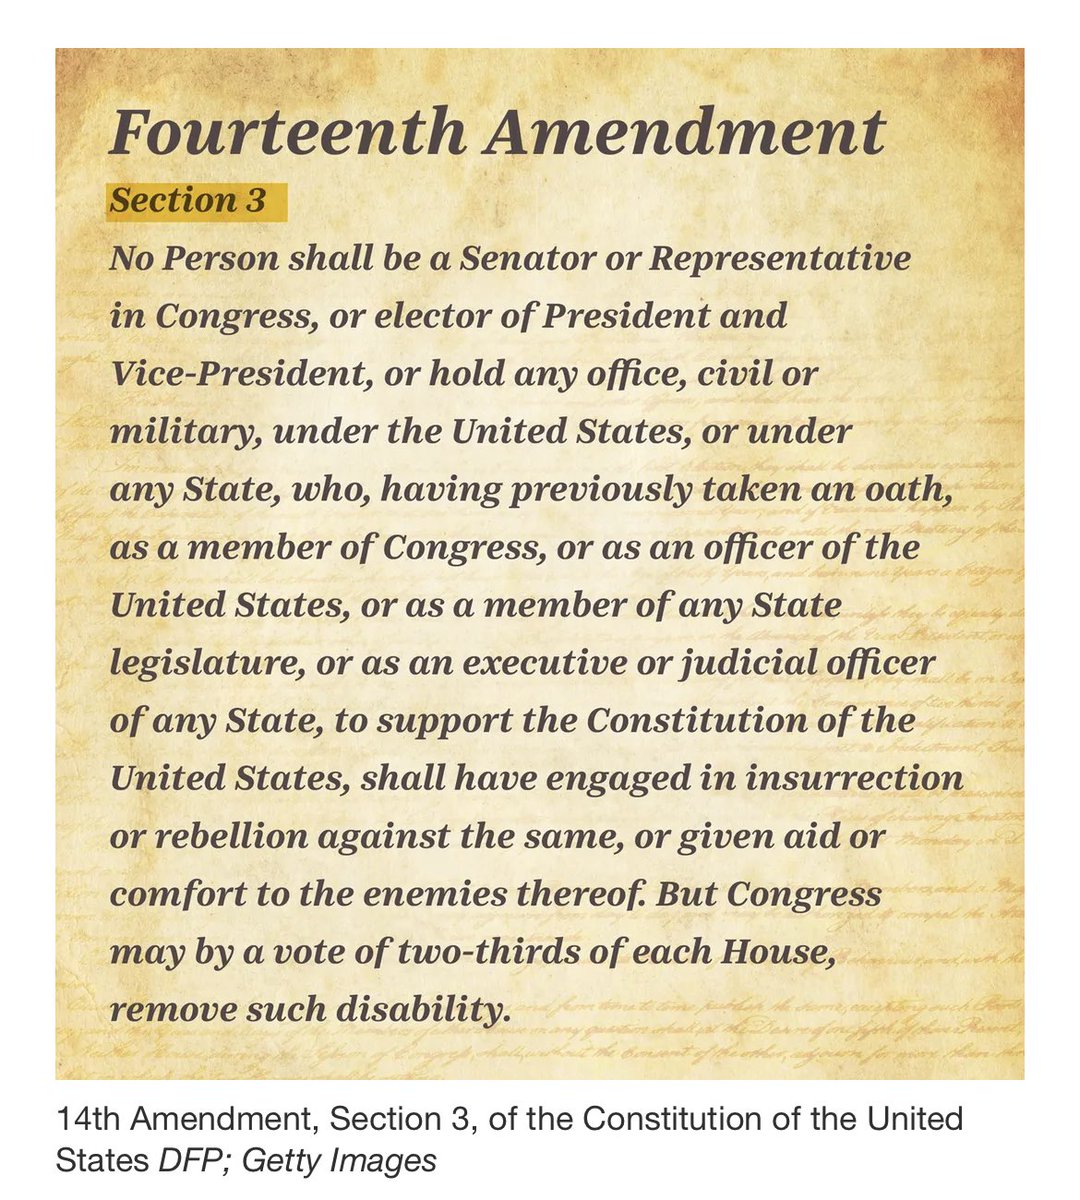 It’s not a matter of *IF* Donald Trump is Constitutionally disqualified from the Presidency. He *IS* Constitutionally disqualified from the Presidency under Section III of the 14th Amendment. The only question is if we will enforce and uphold the Constitution or not. And we MUST.